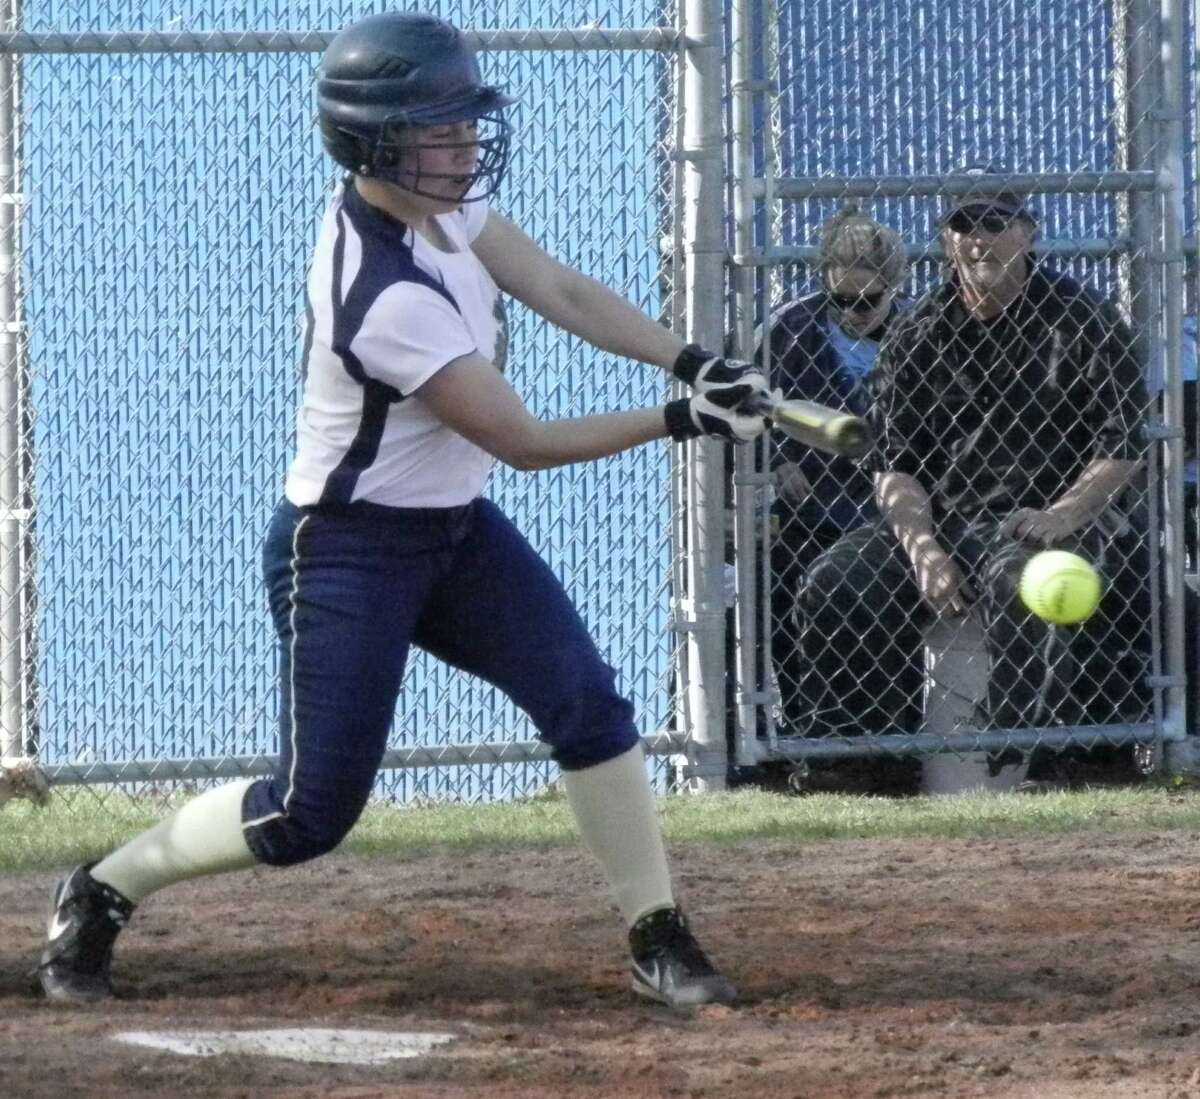 Notre Dame junior right fielder Jeanna Emanuel grounds back to the pitcher on Monday, April 28 in an SWC Patriot Division softball game in Fairfield. Oxford beat the Lancers 5-1 on a one-hitter by pitcher Ashley Guillette, who had a perfect game against Notre Dame in 2013.